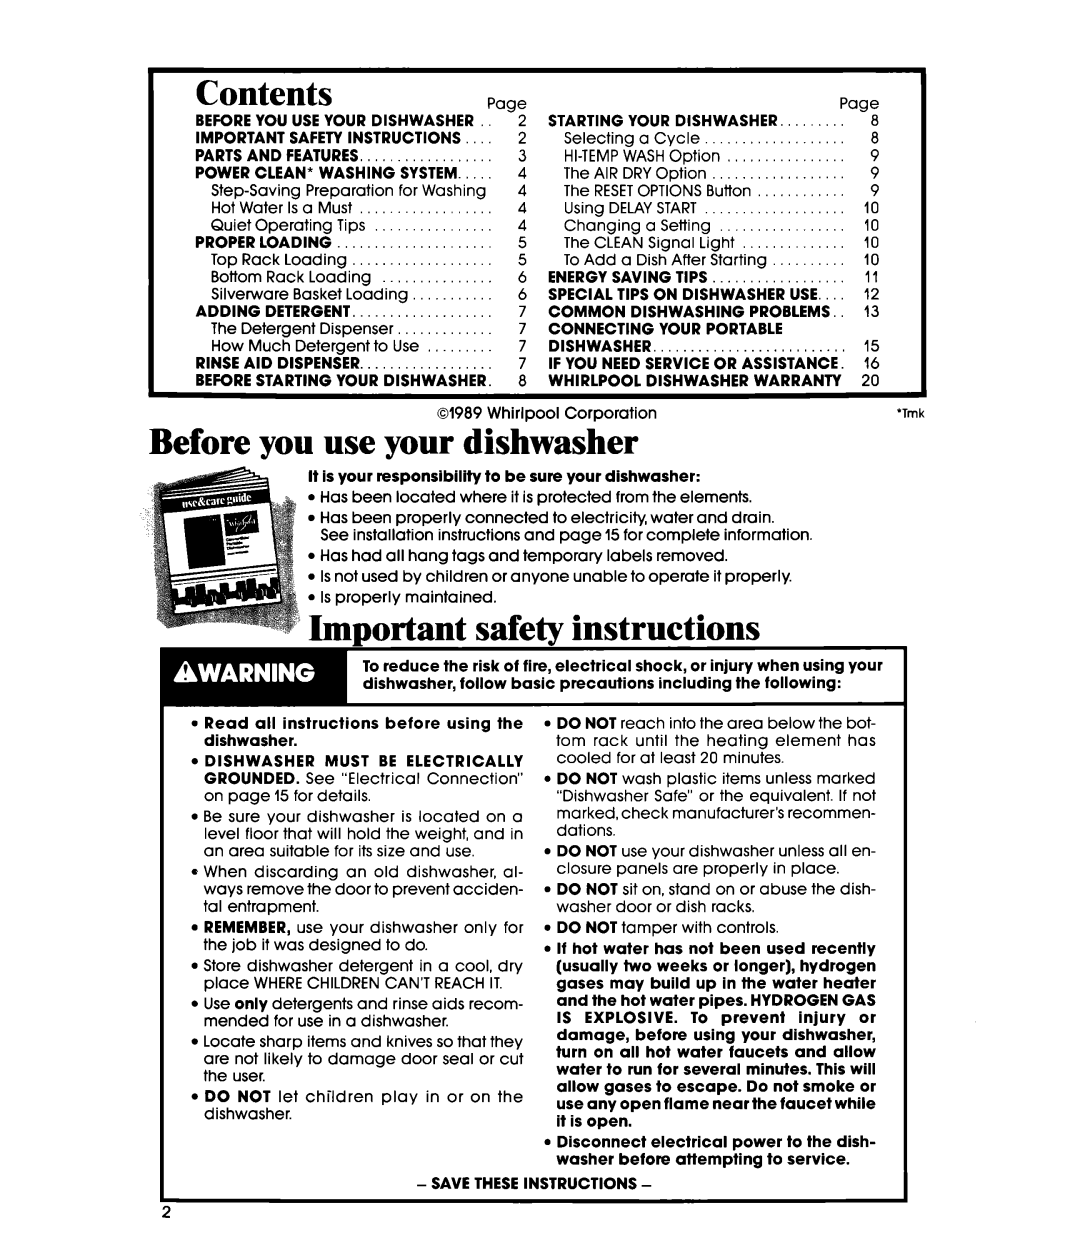 Whirlpool DP8700XT Series manual Contents, Before you use your dishwasher, ’ Important safety instructions 